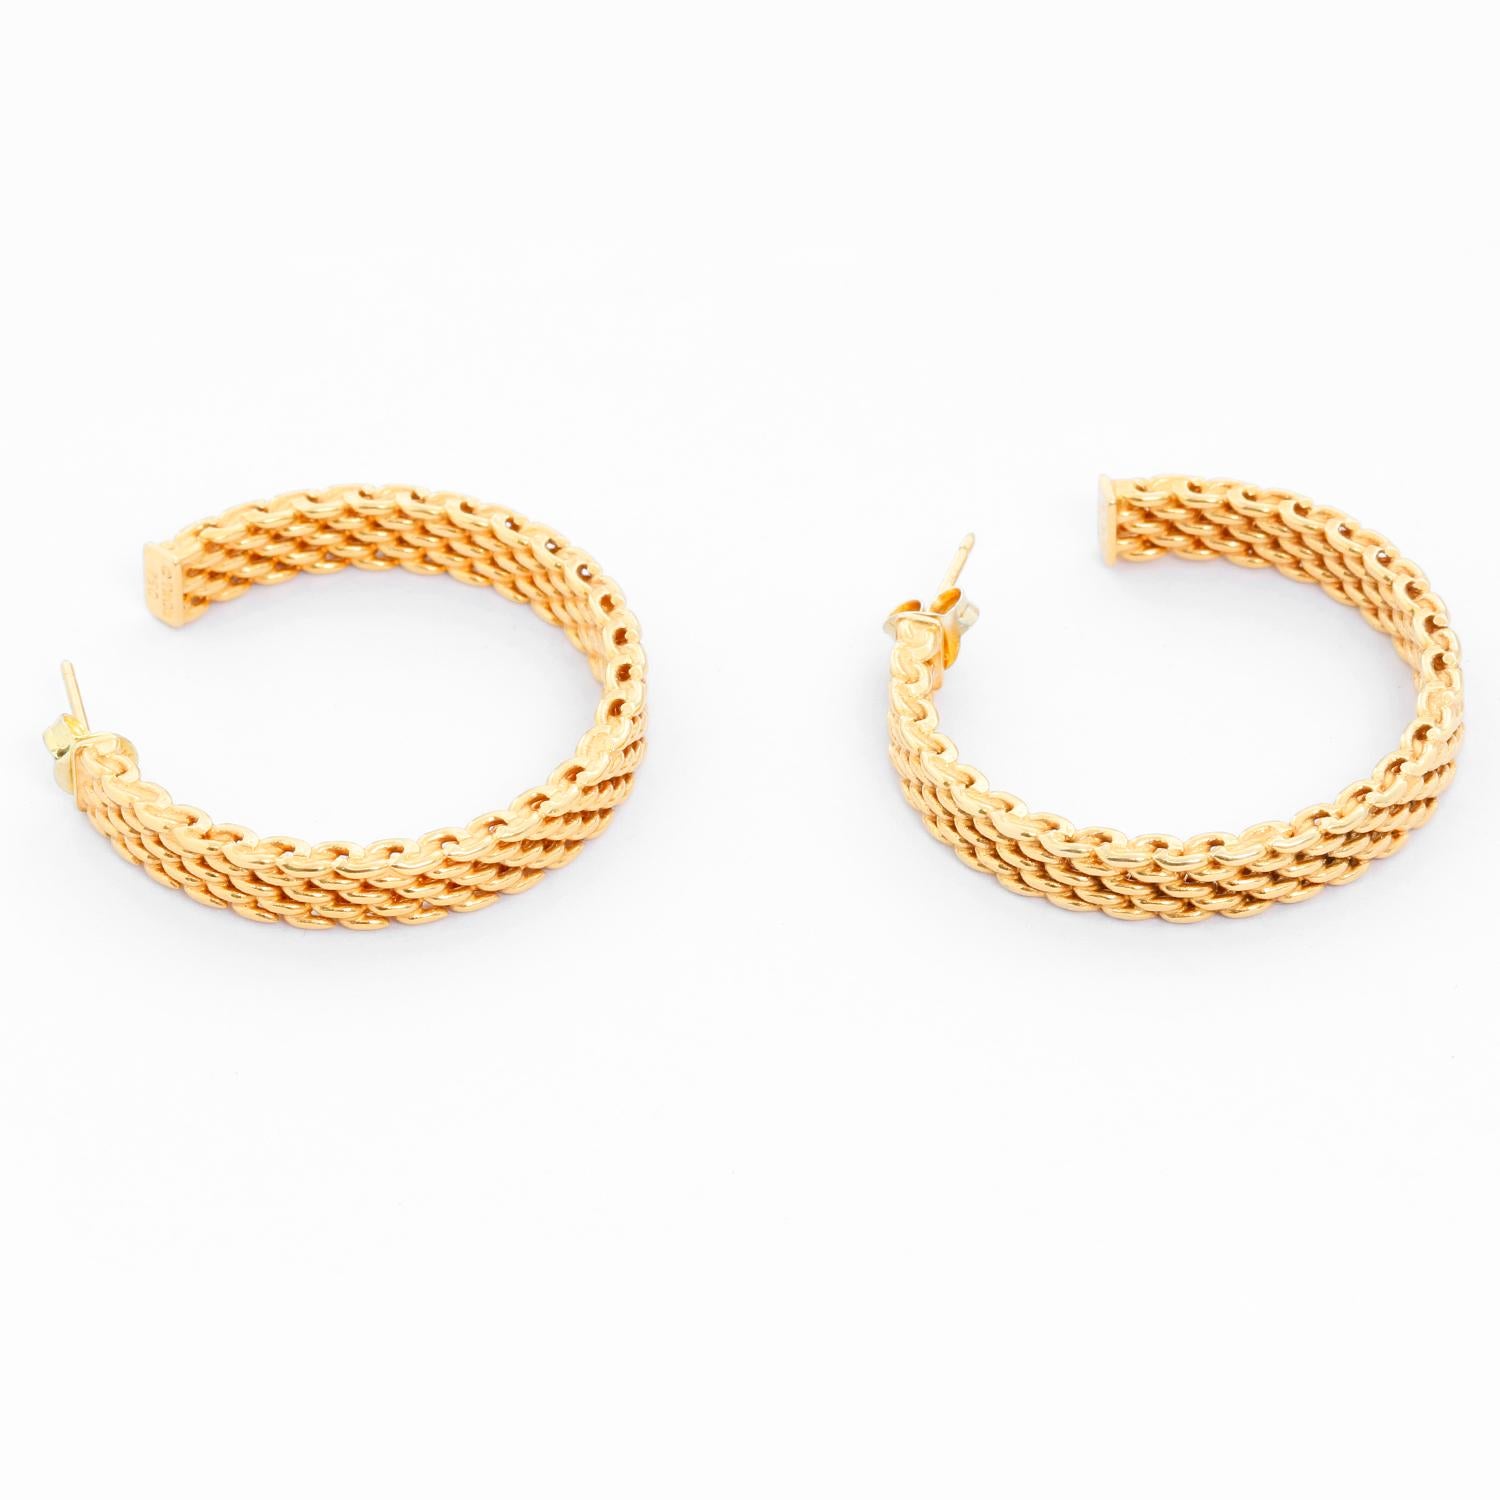 Tiffany & Co. 18K Yellow Gold Somerset Mesh Hoops - Large 1.44 inch gold mesh hoops. Width 4mm. Hallmarked; Tiffany & Co. 750. Pre-owned with Tiffany box. 